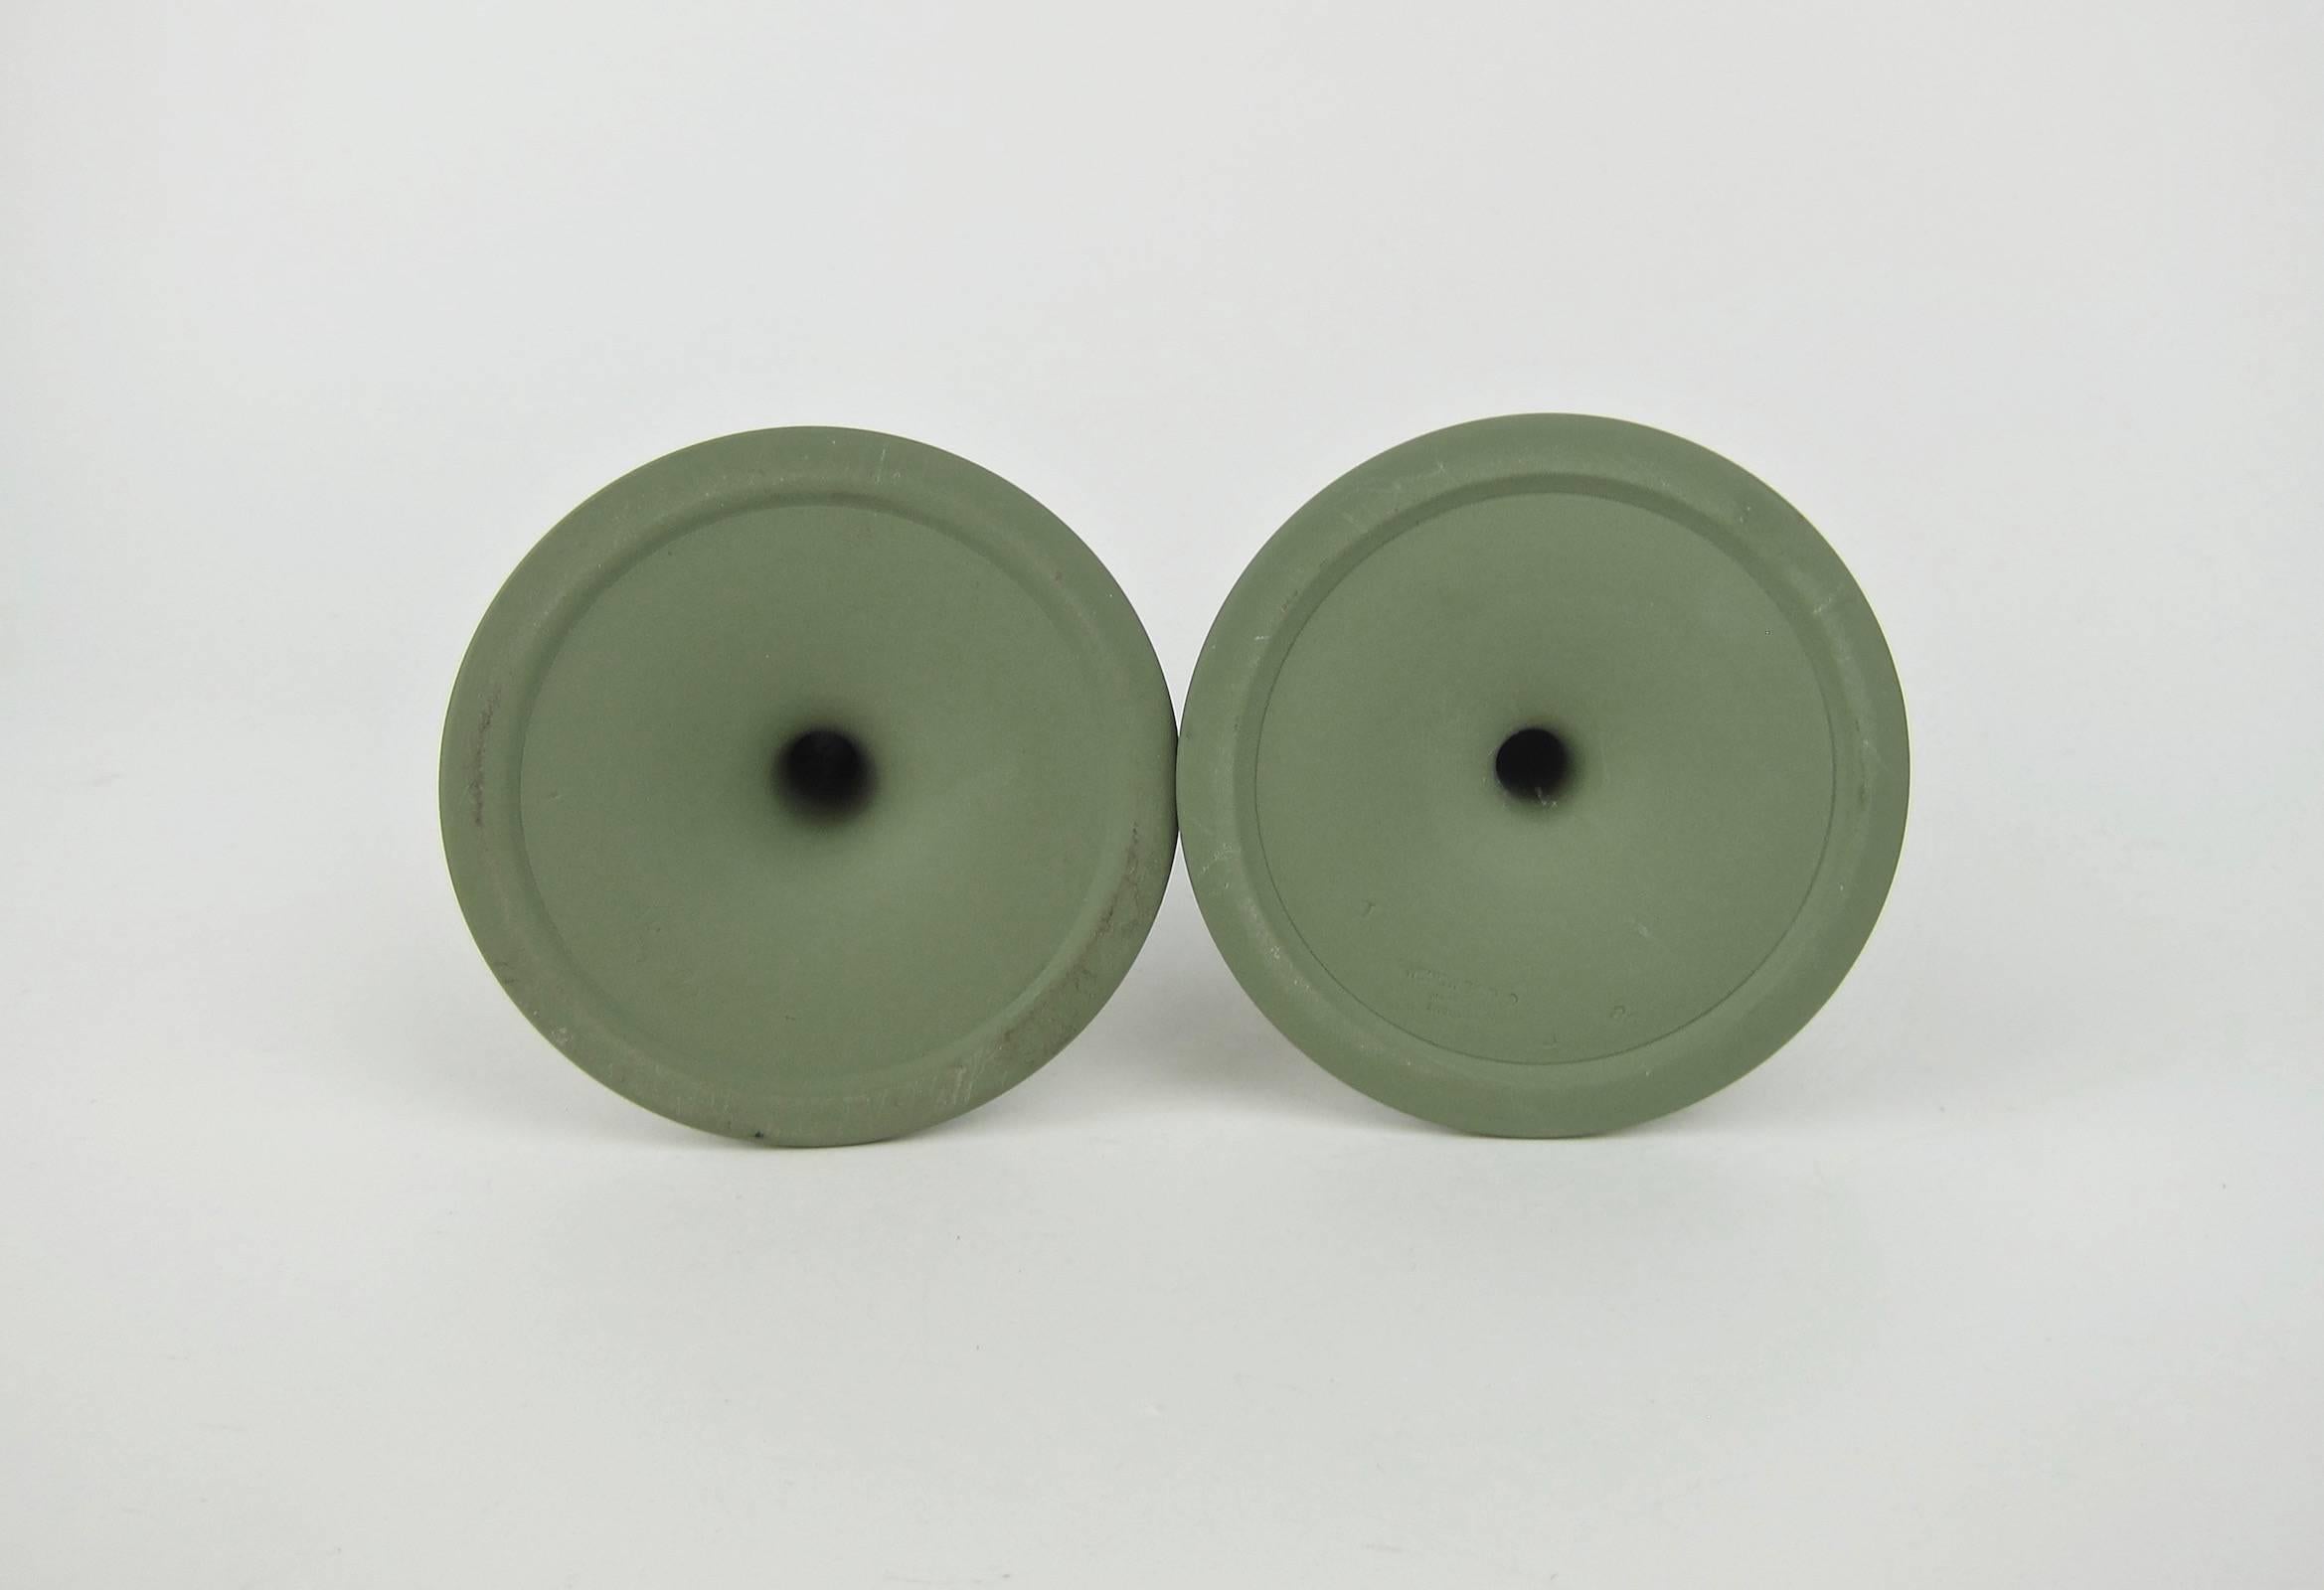 20th Century Wedgwood Neoclassical Candlestick Pair in Solid Green Jasper